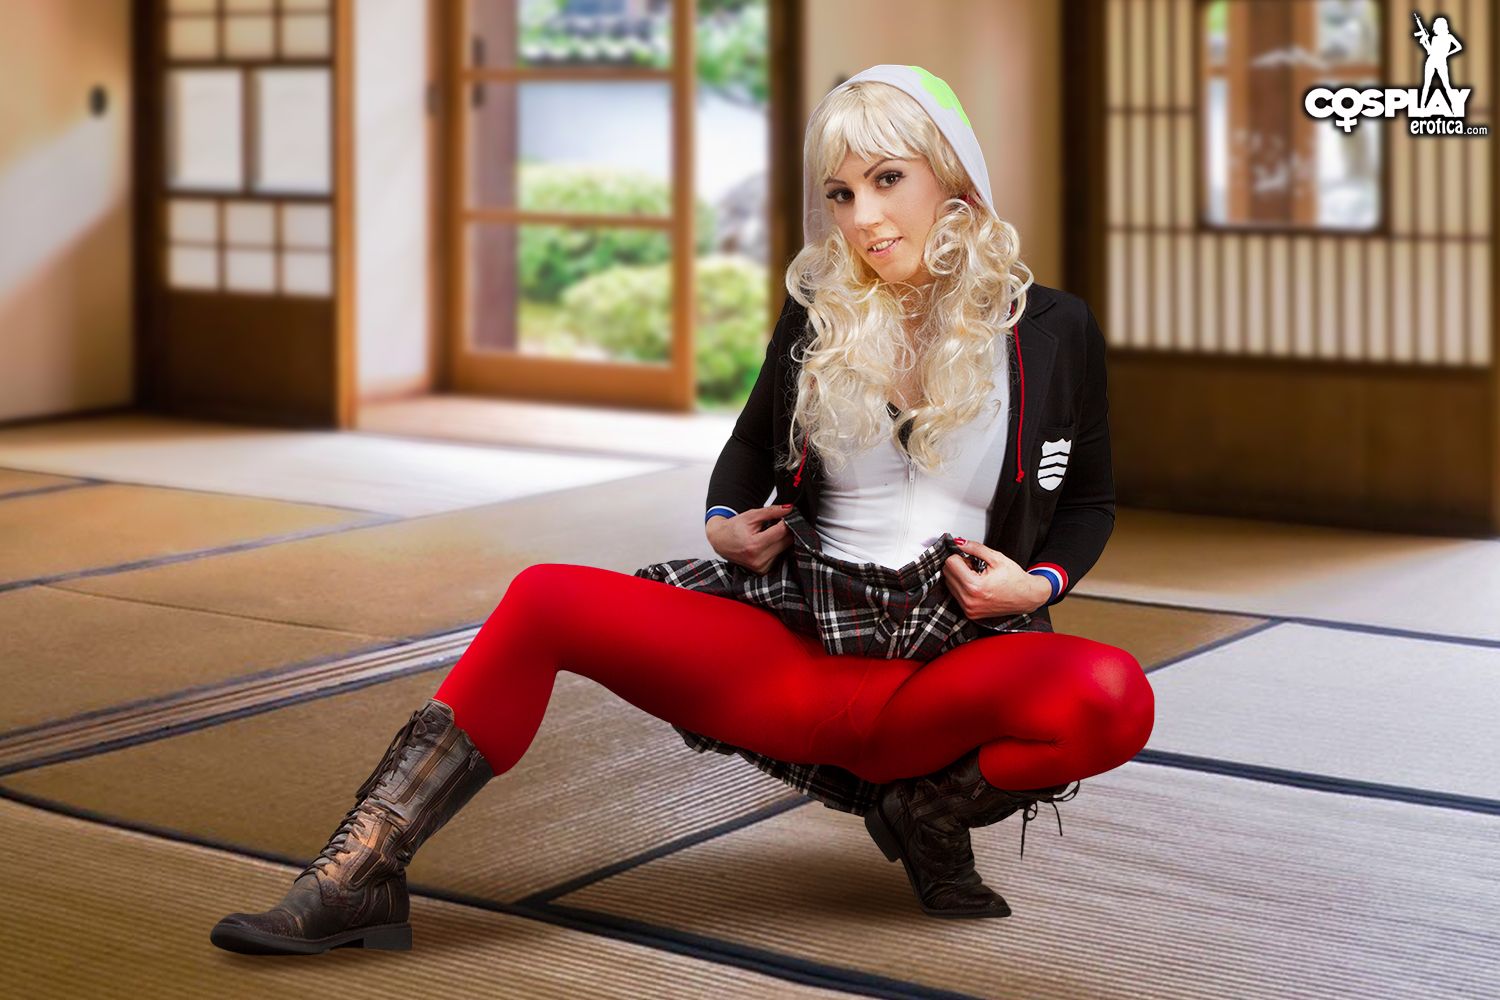 Cosplay Erotica Presents: Student By Day, Phantom Thief At Night With Devorah